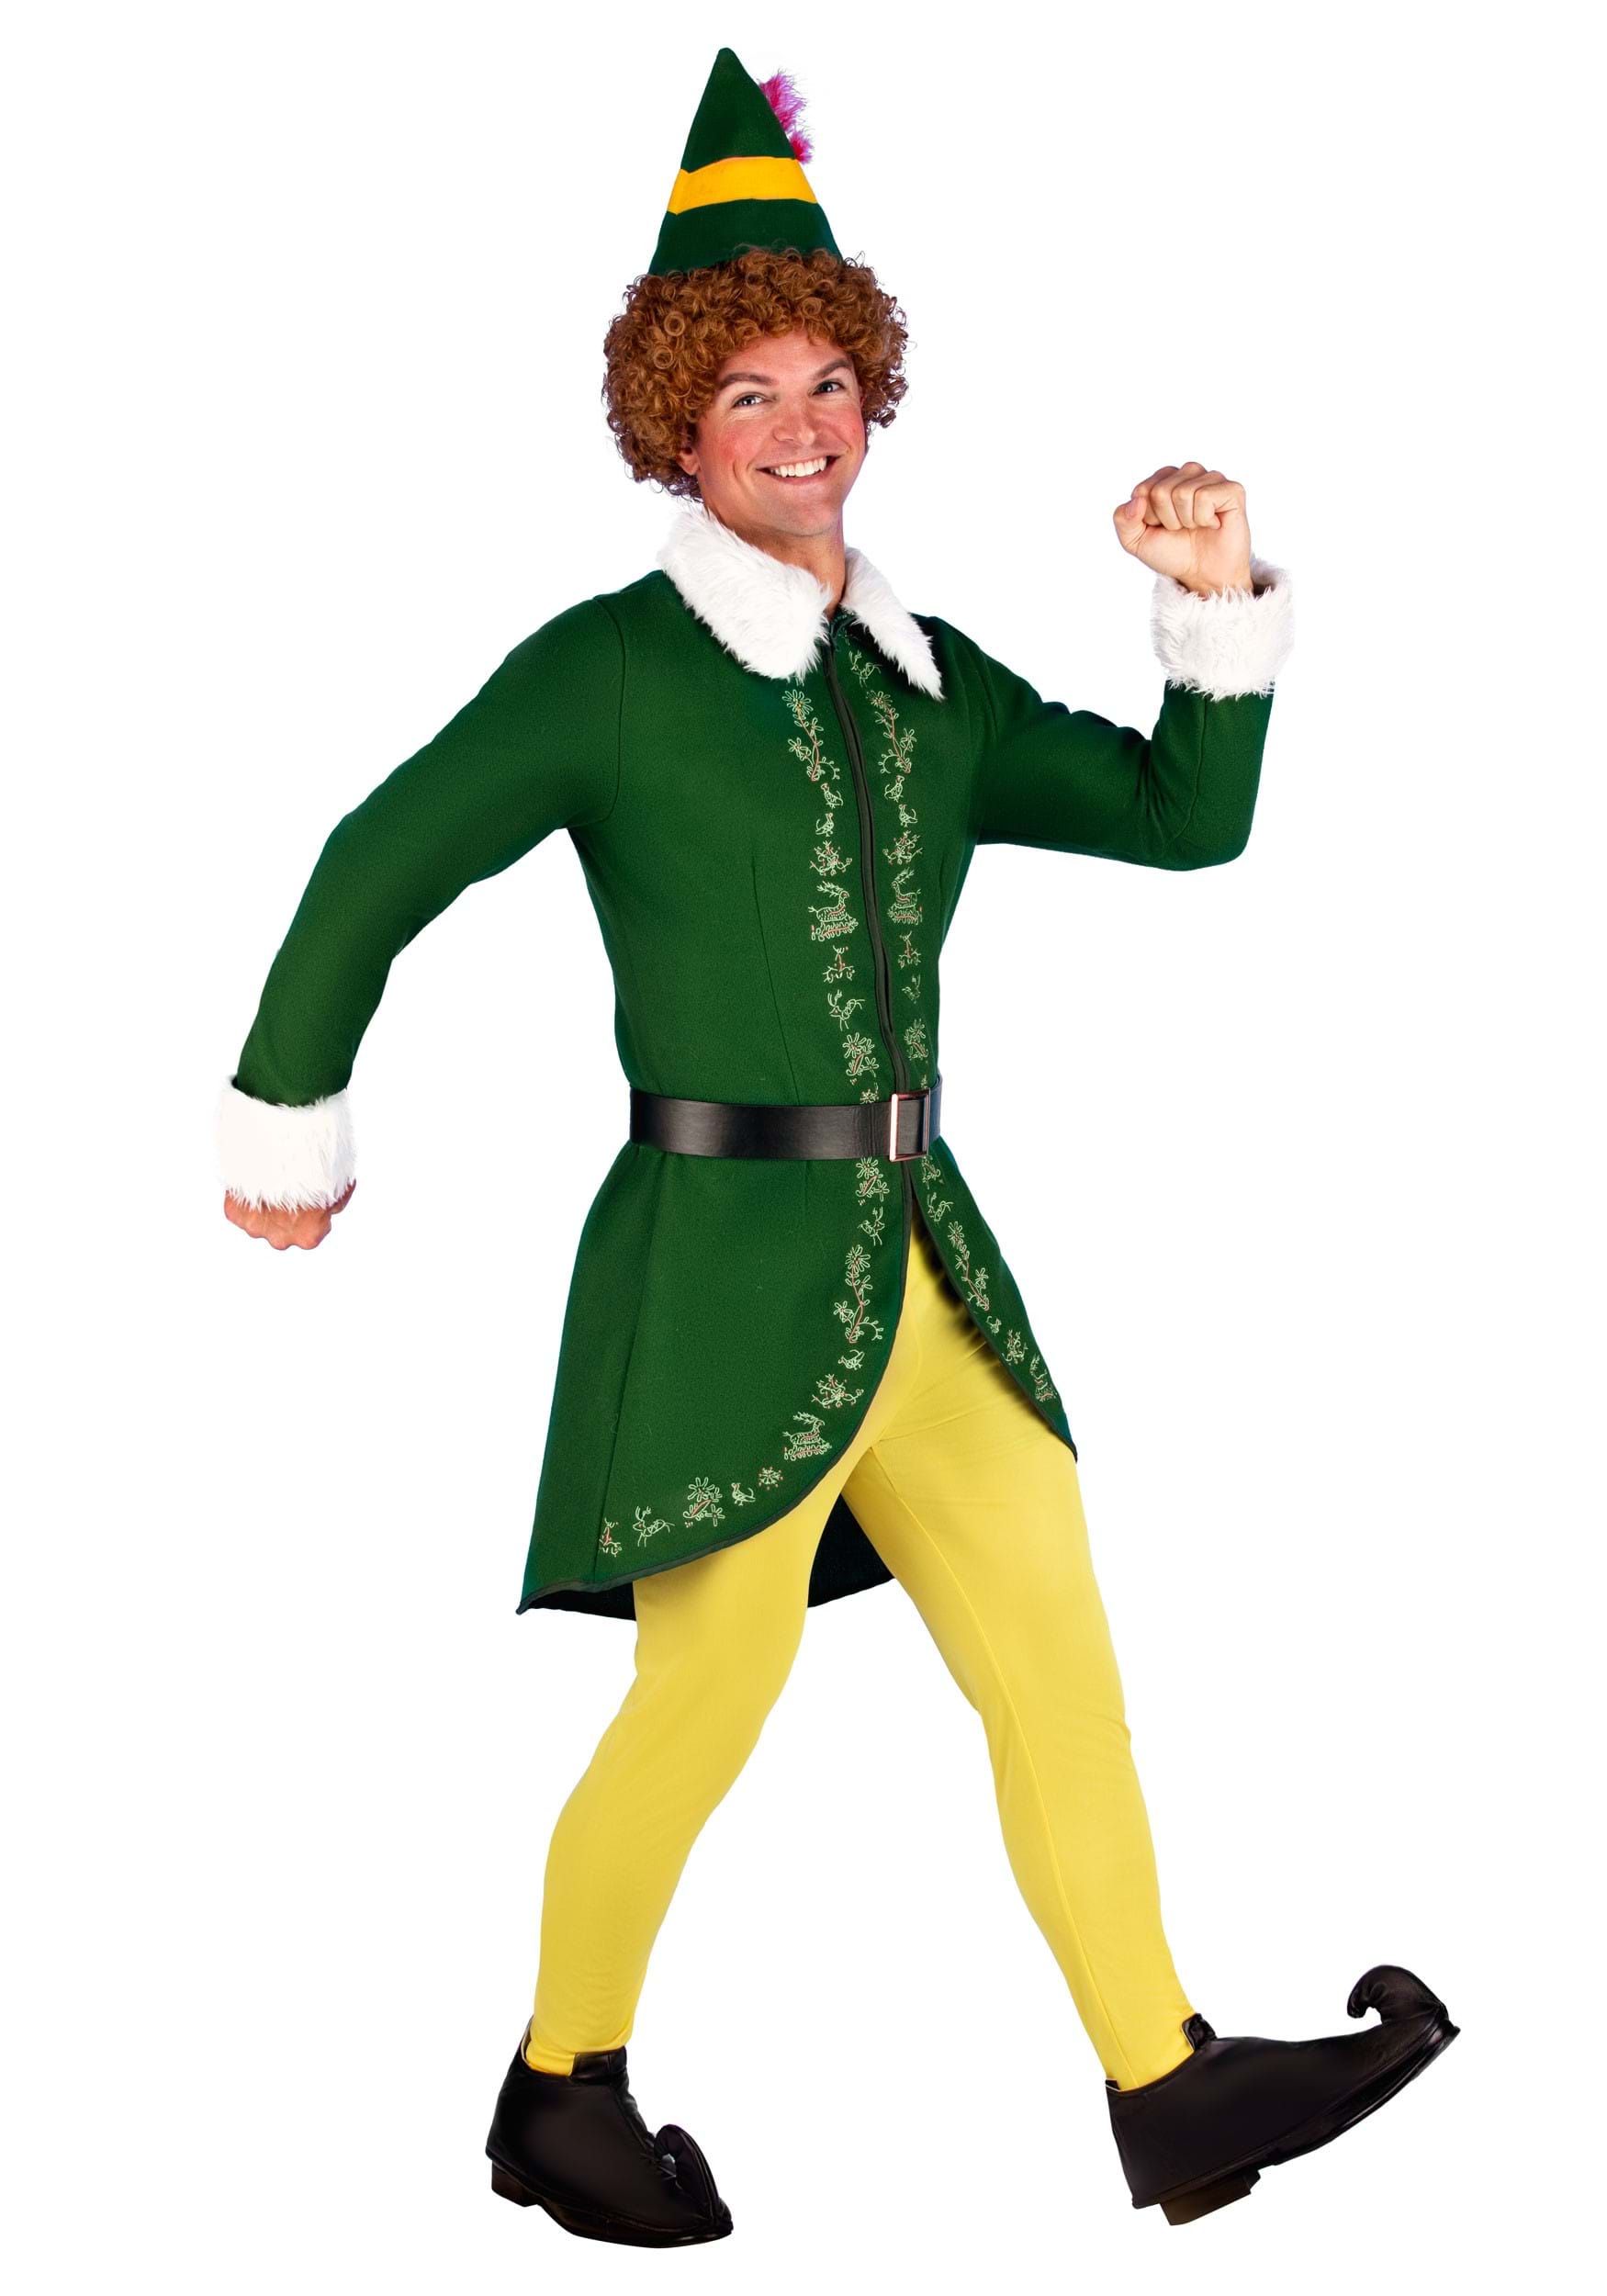 Photos - Fancy Dress Buddy FUN Costumes Authentic  the Elf Adult Outfit Green/White/Yell 